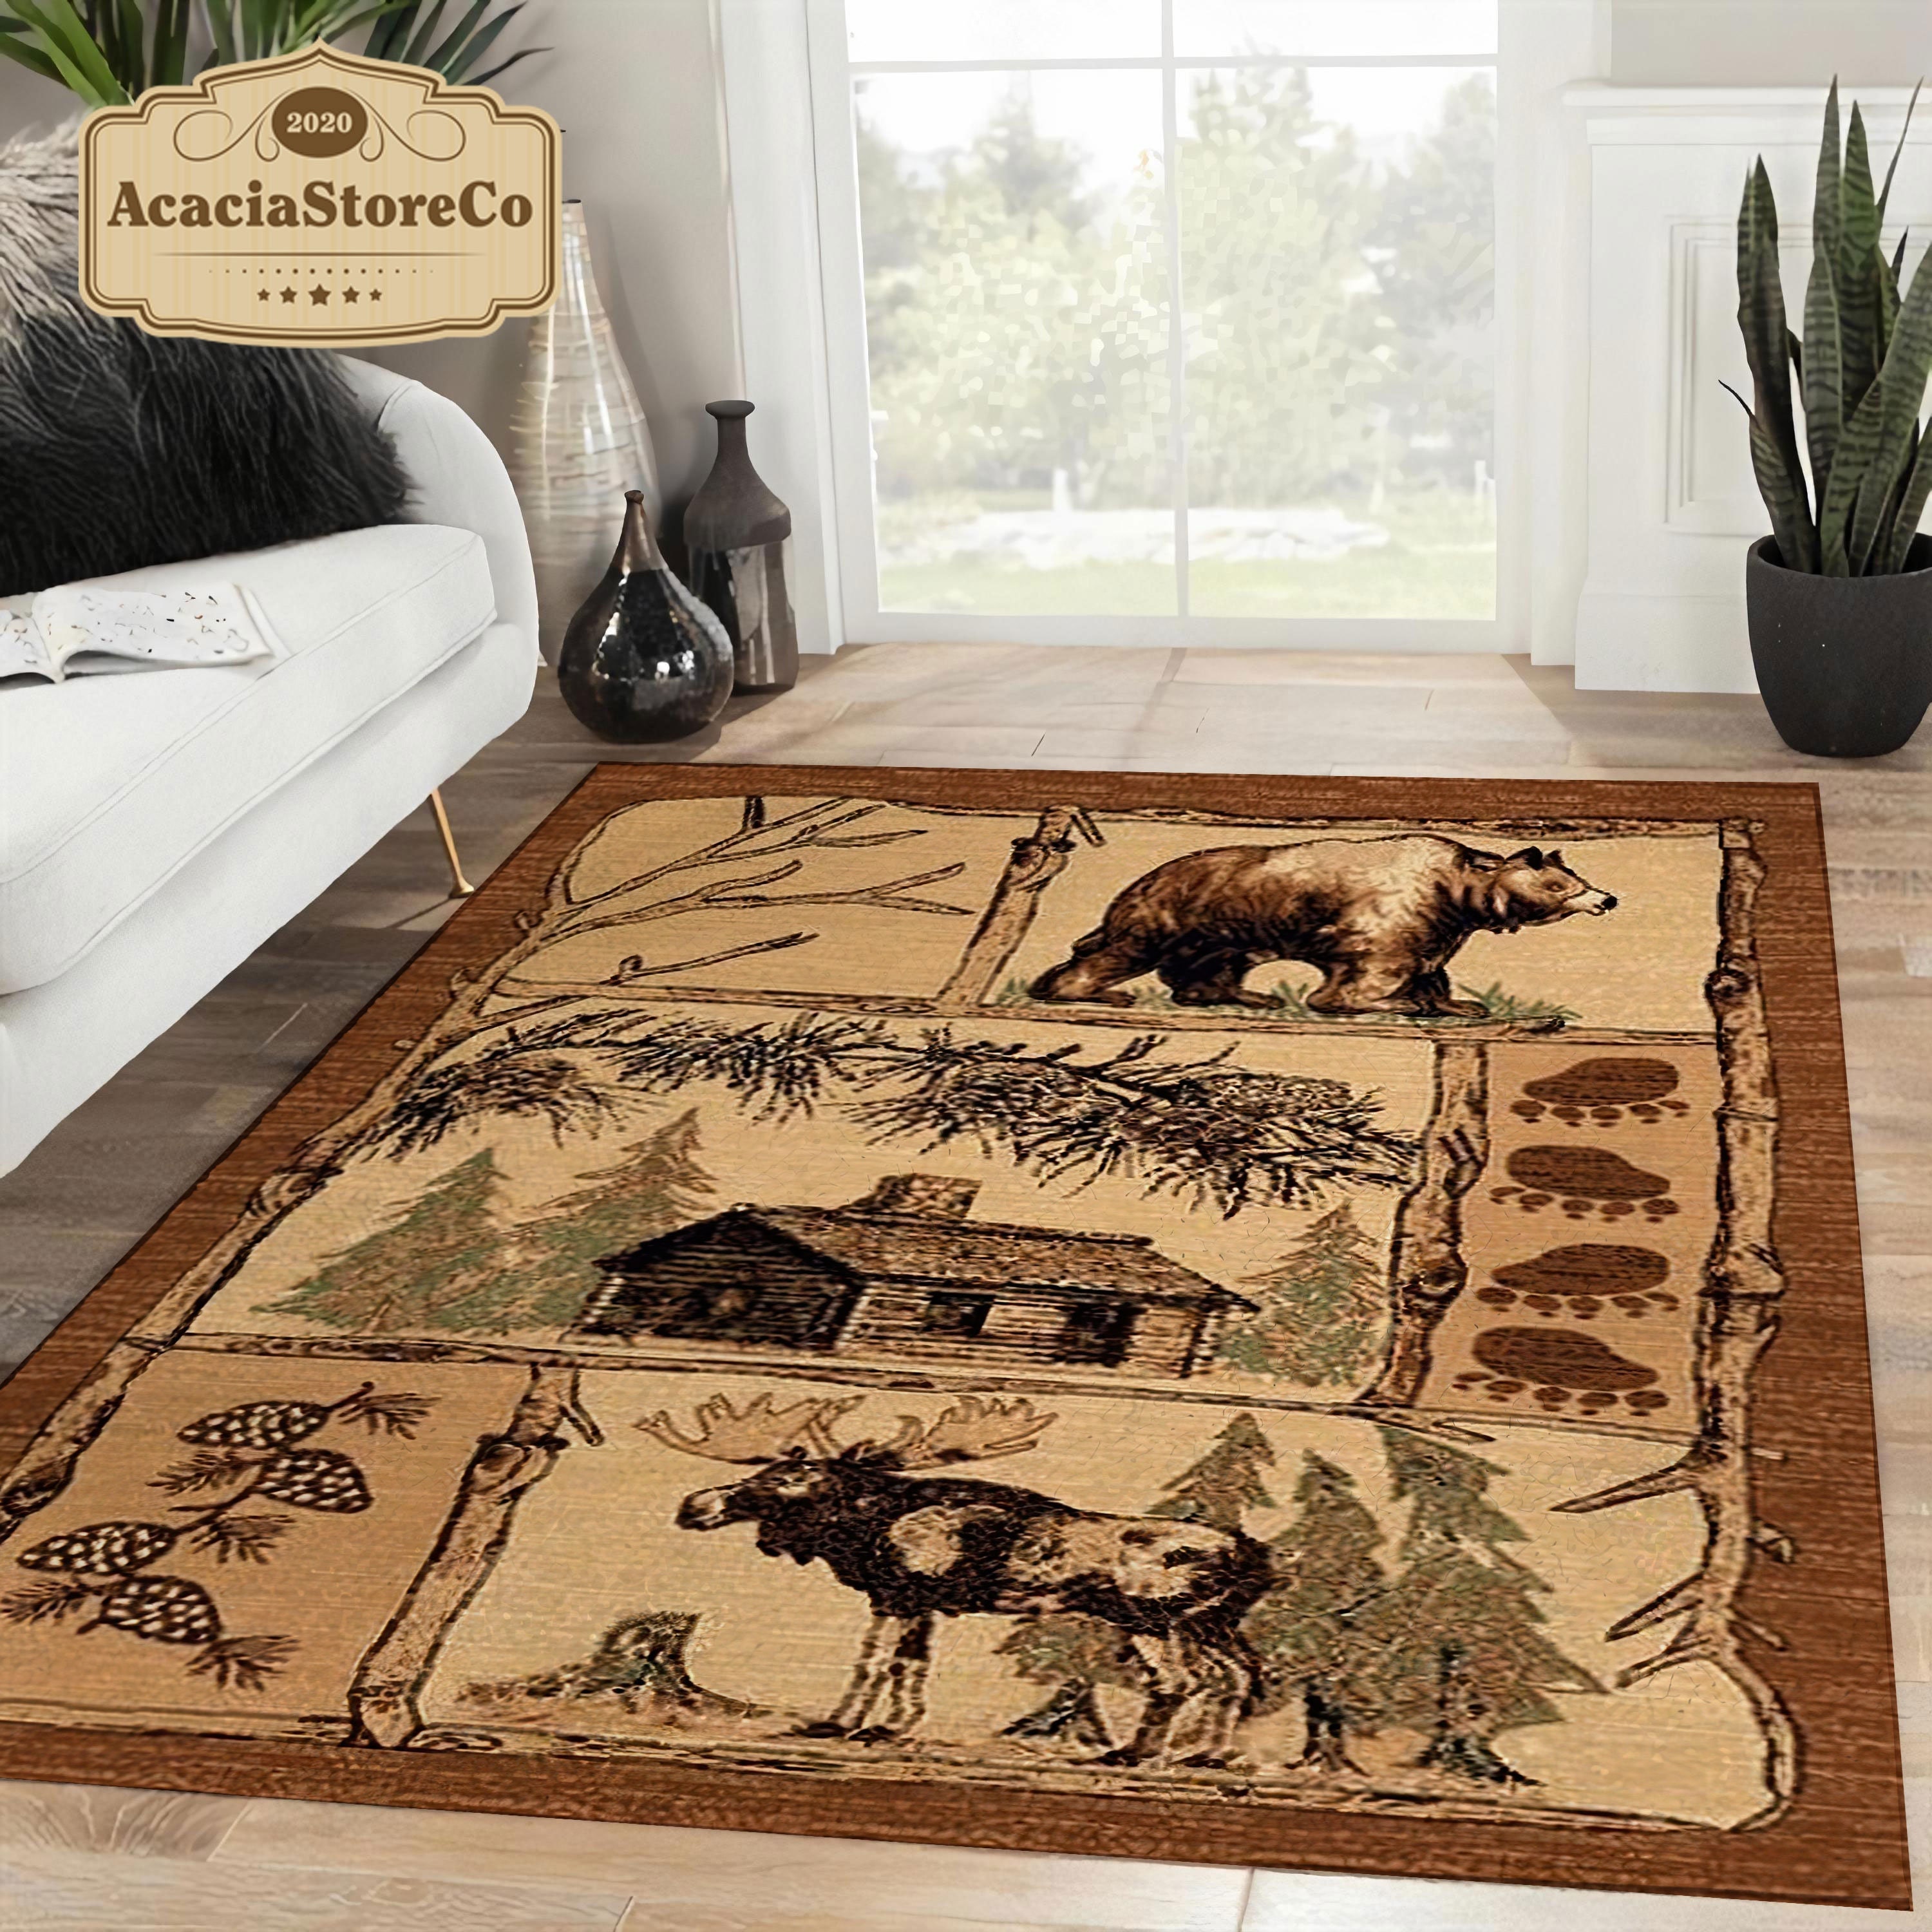 10 Pc Wildlife Kitchen Dish Cloth Set Perfect for Your Hunting Lodge or Log  Cabin Featuring Bear Deer Moose by The Big One